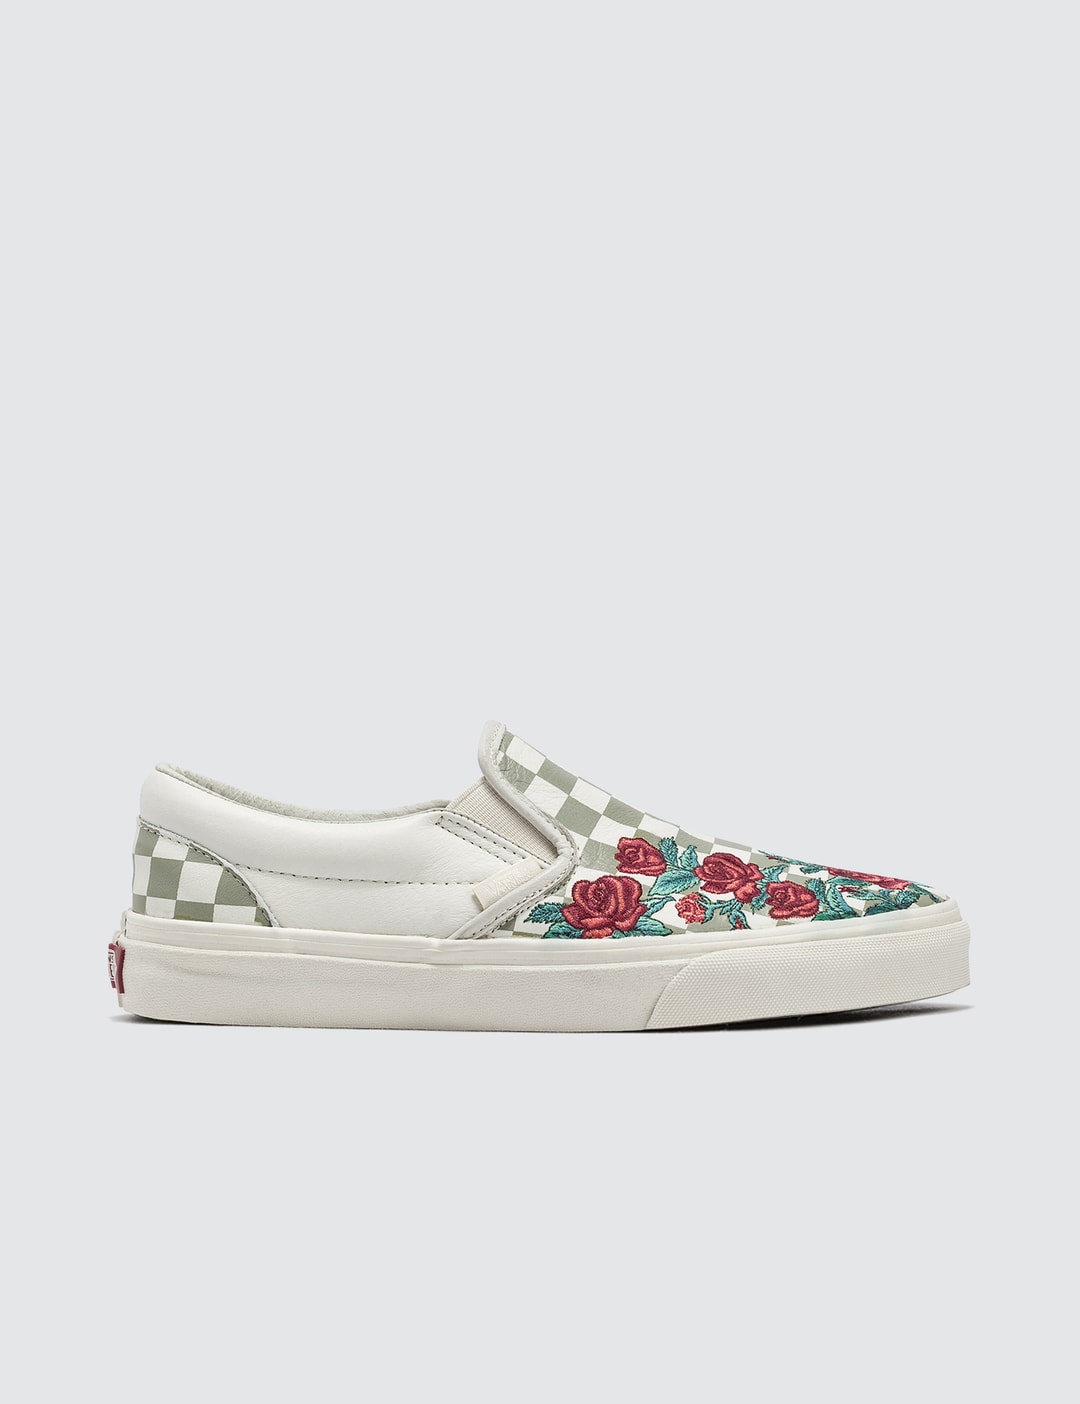 Vans - Classic Slip On Dx | HBX - Globally Curated Fashion and ...